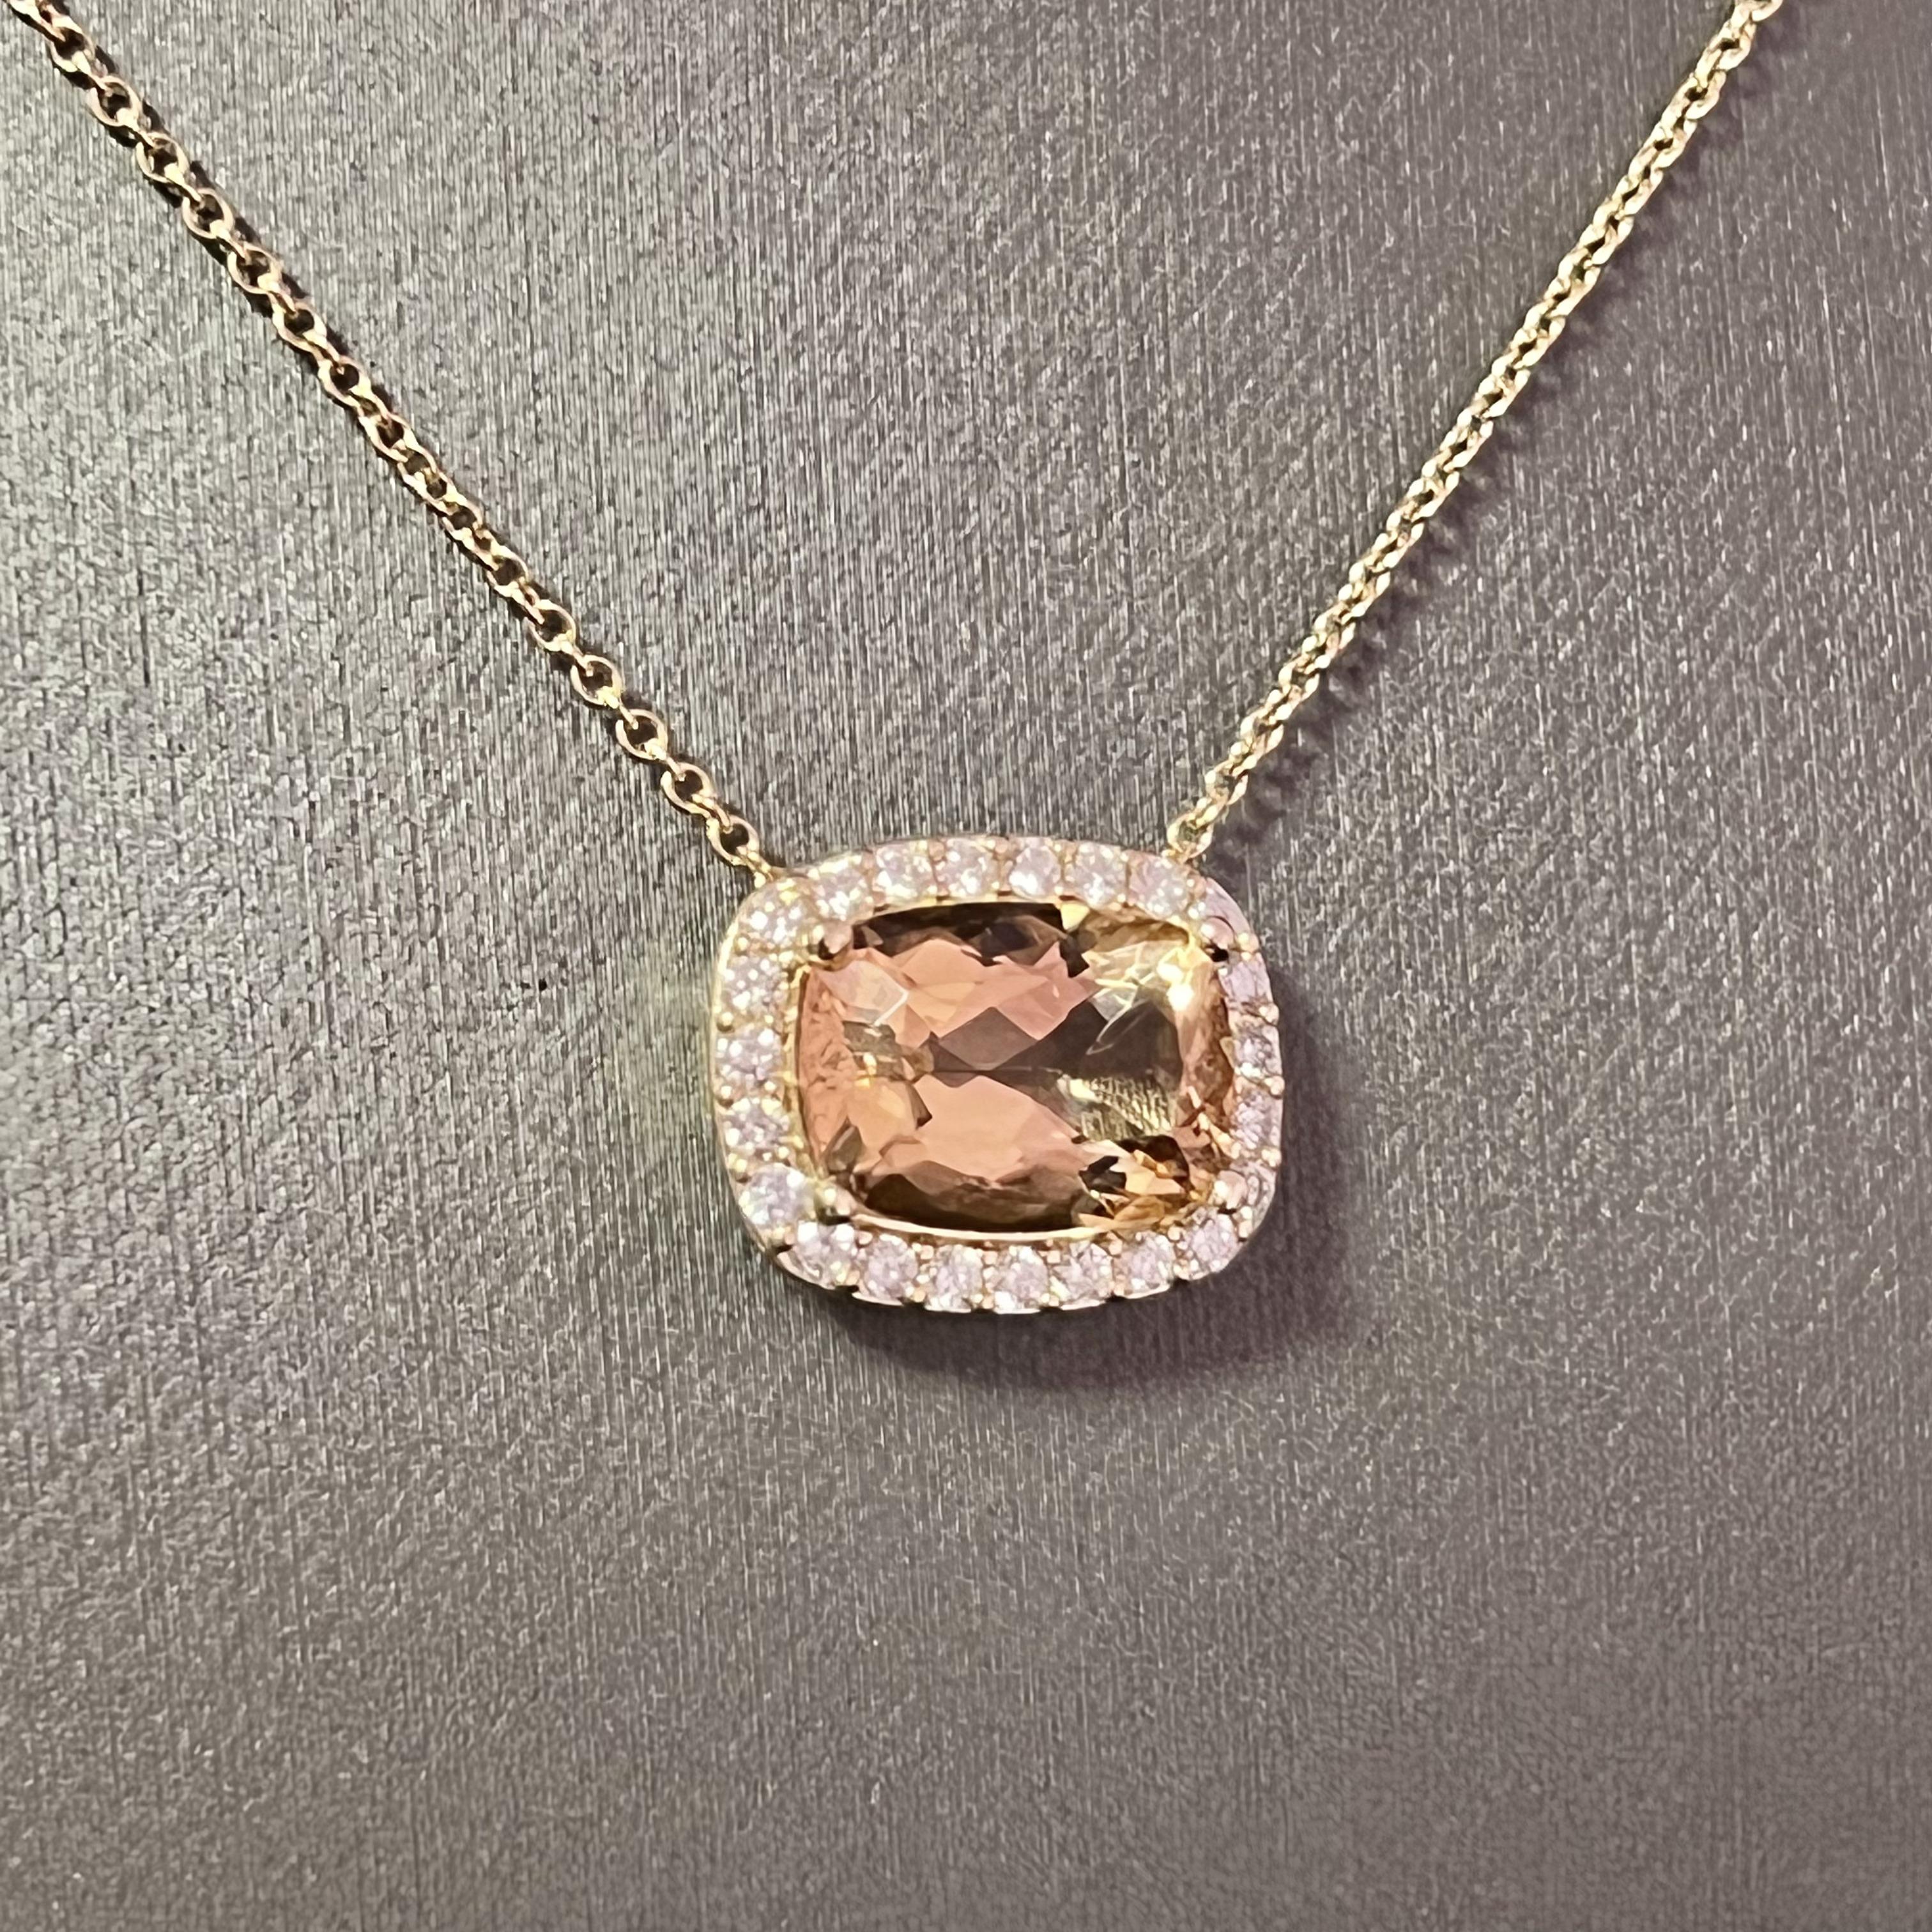 Diamond Morganite Pendant Necklace 14k Gold 7.35 TCW Certified For Sale 1